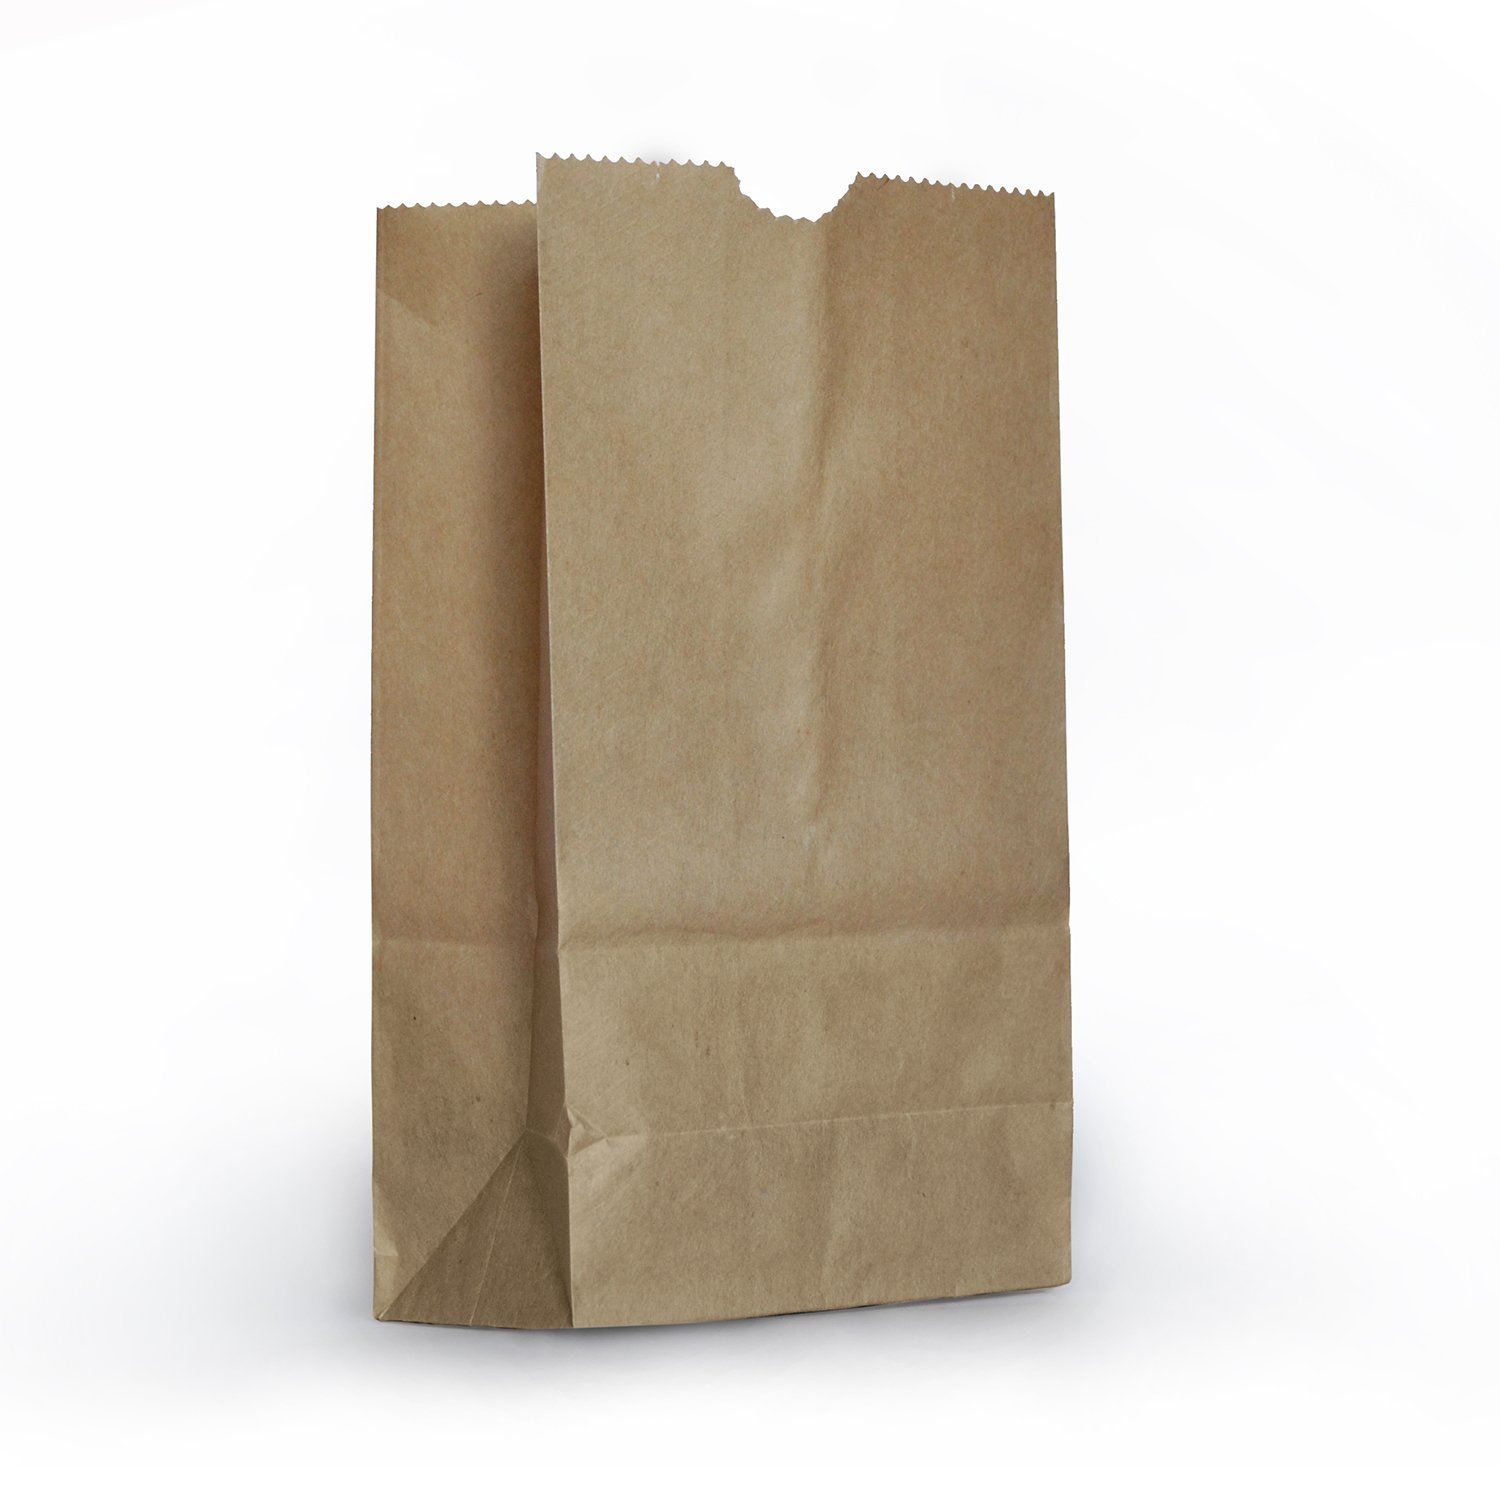 Amazon.com: 1 X Small Brown Paper Bags - 100 Pack